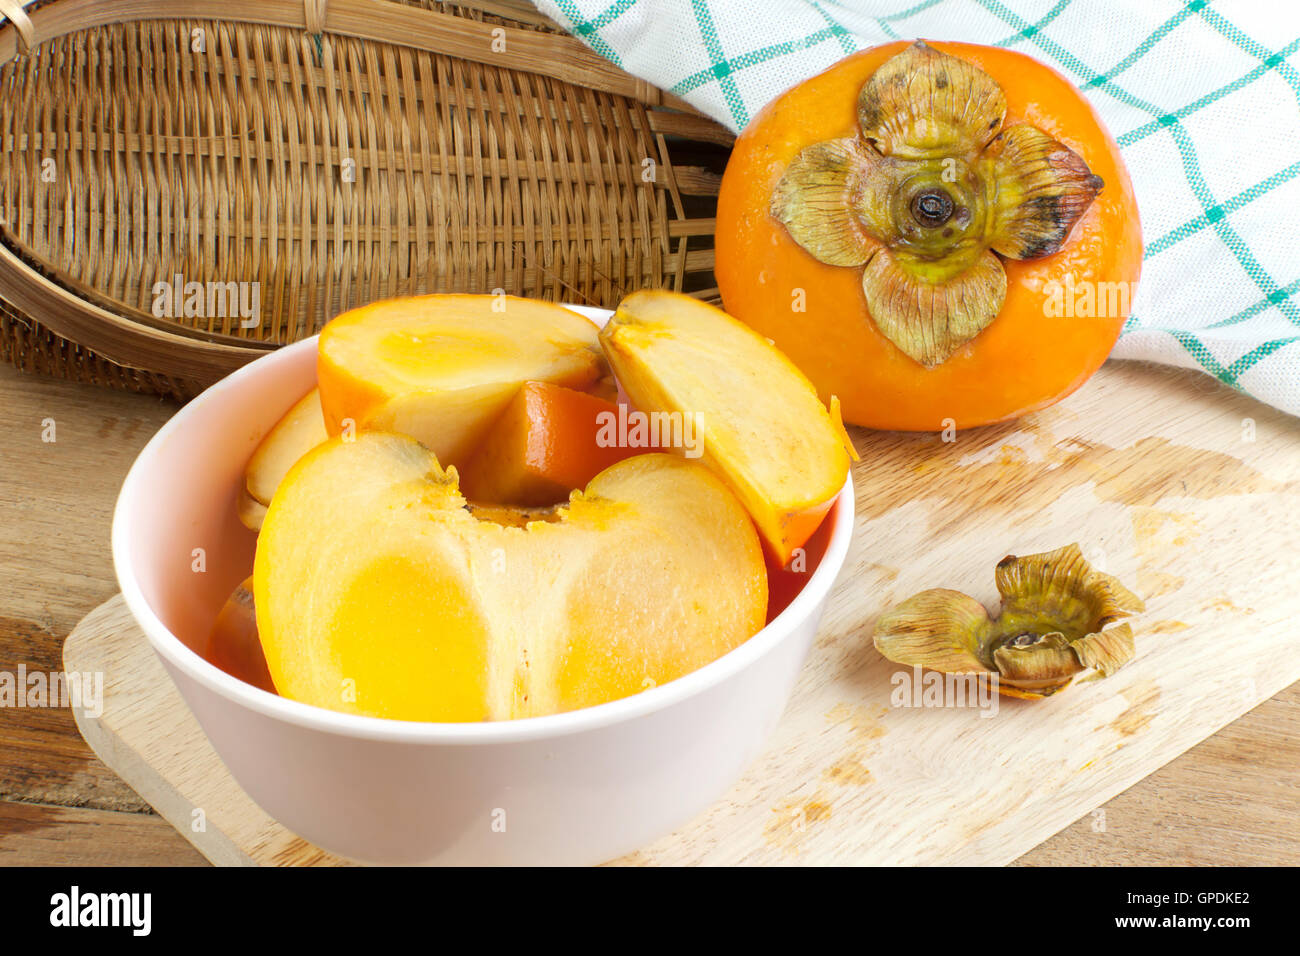 Persimmon yellow color ripe split fruits on wood table Stock Photo